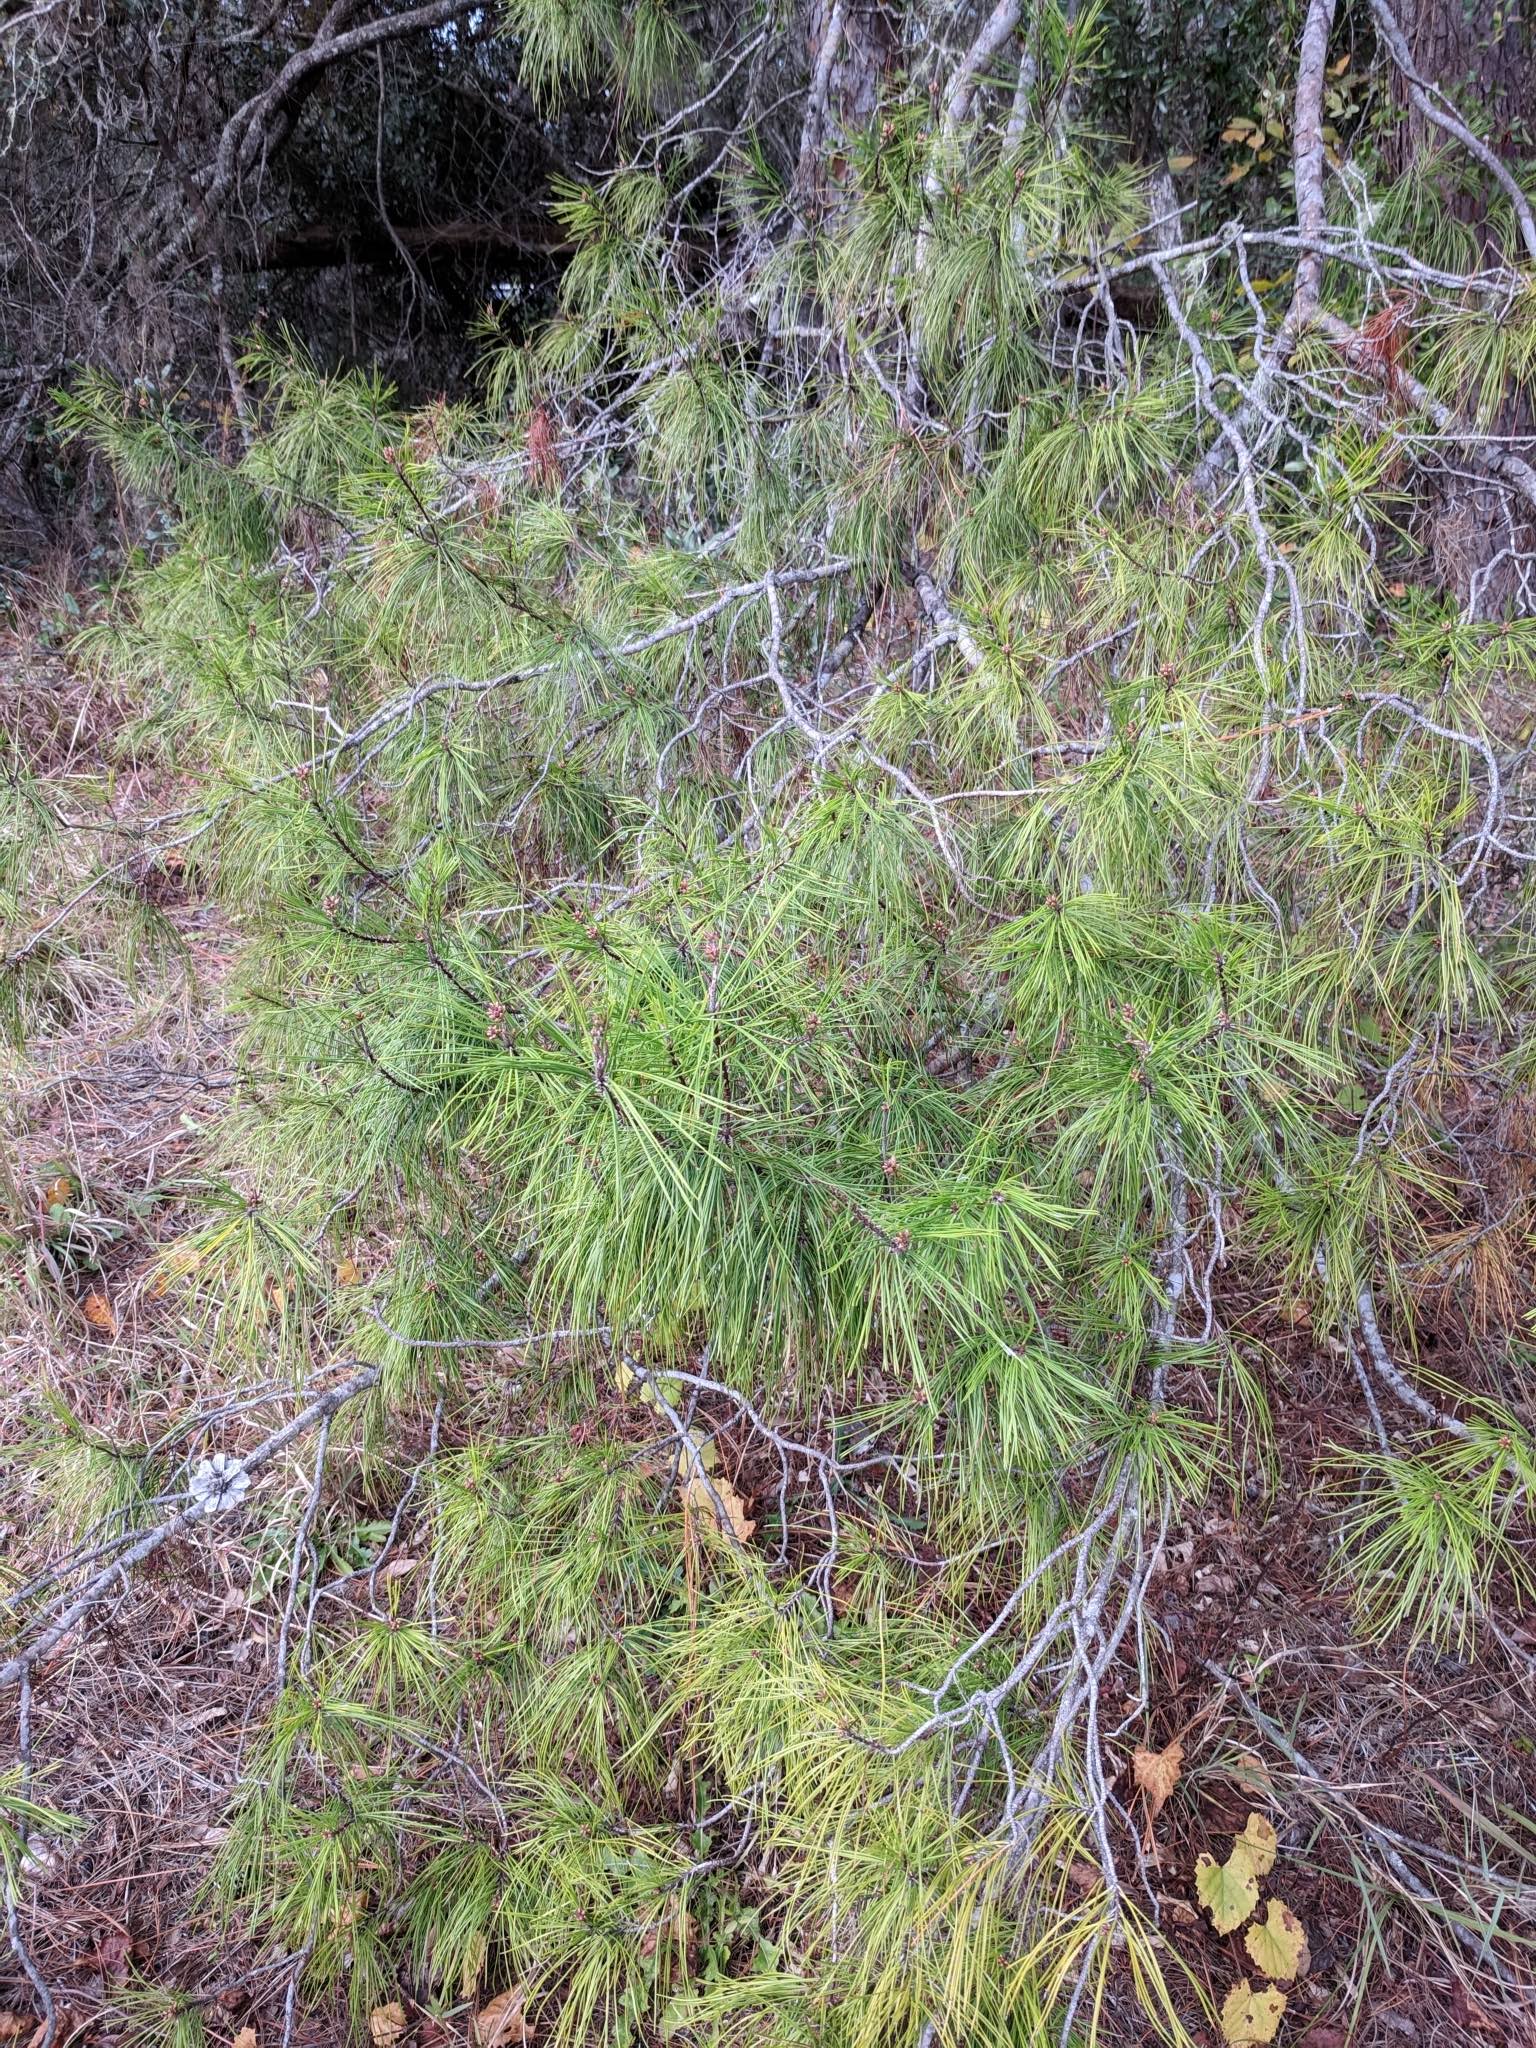 The Scientific Name is Pinus clausa. You will likely hear them called Sand Pine. This picture shows the This pine is usually seen as a scrubby tree and can thrive in almost any soil. of Pinus clausa